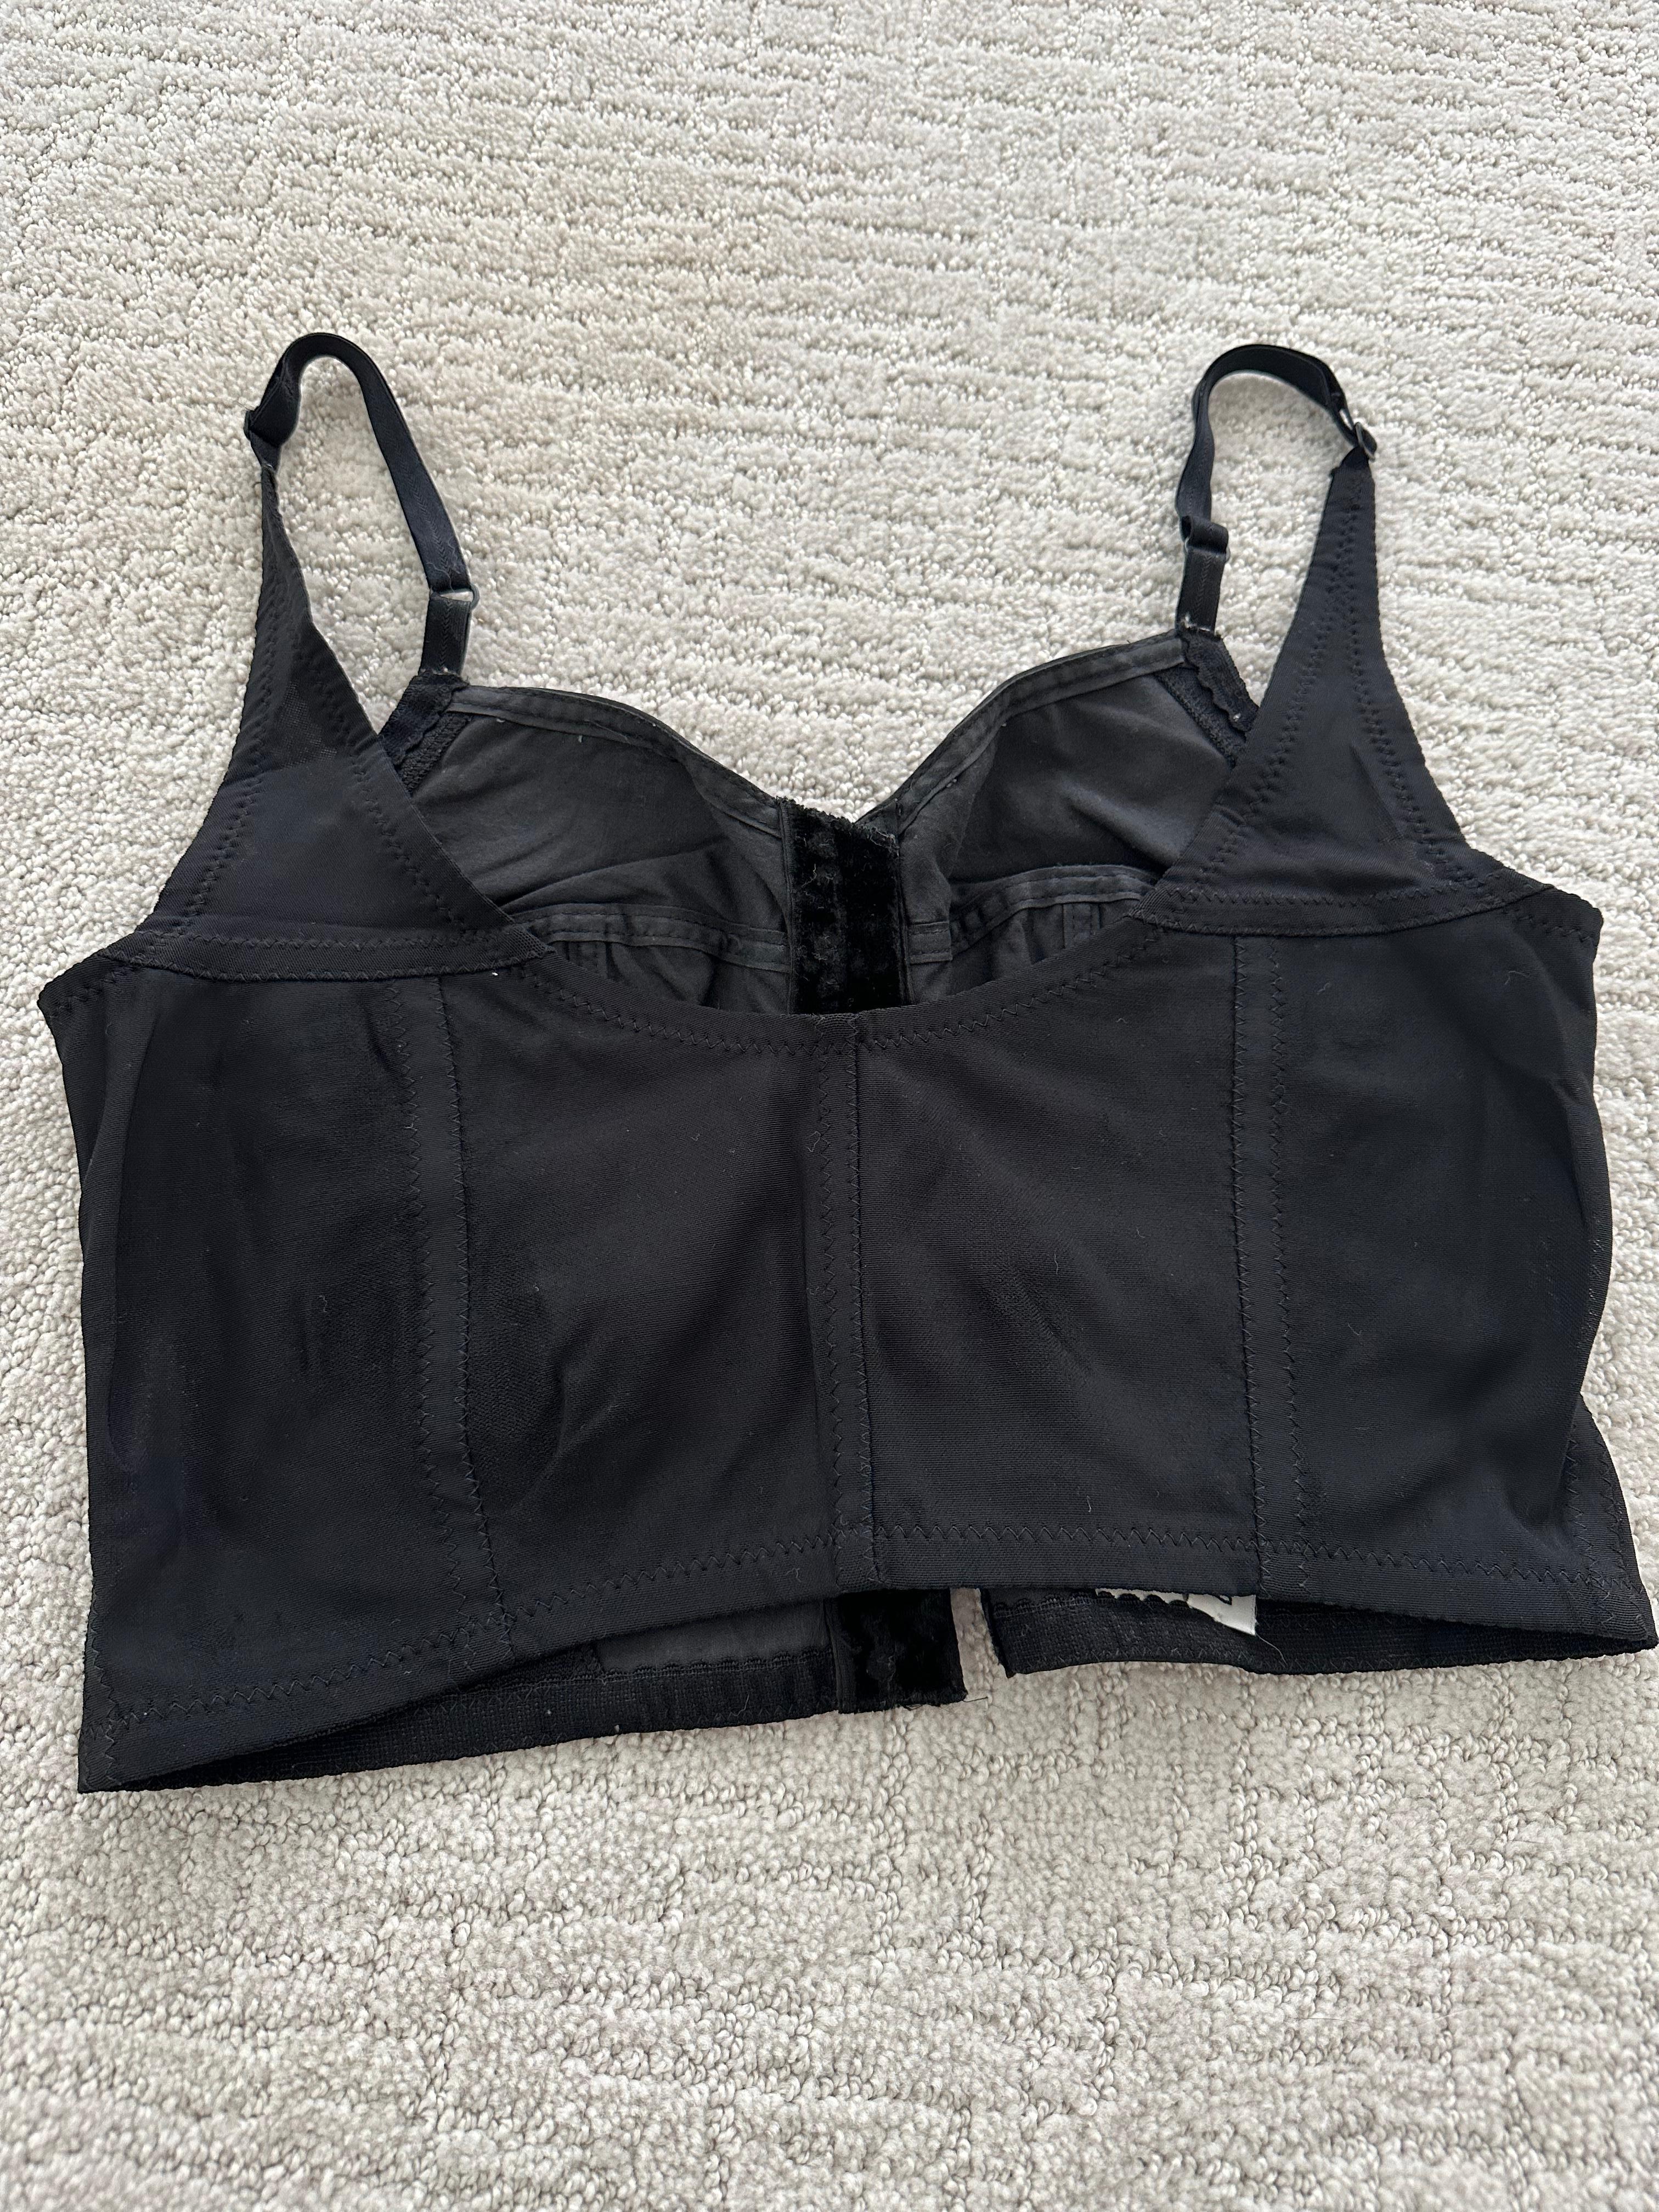 Dolce Gabbana 1992 bustier top  In Good Condition For Sale In Annandale, VA